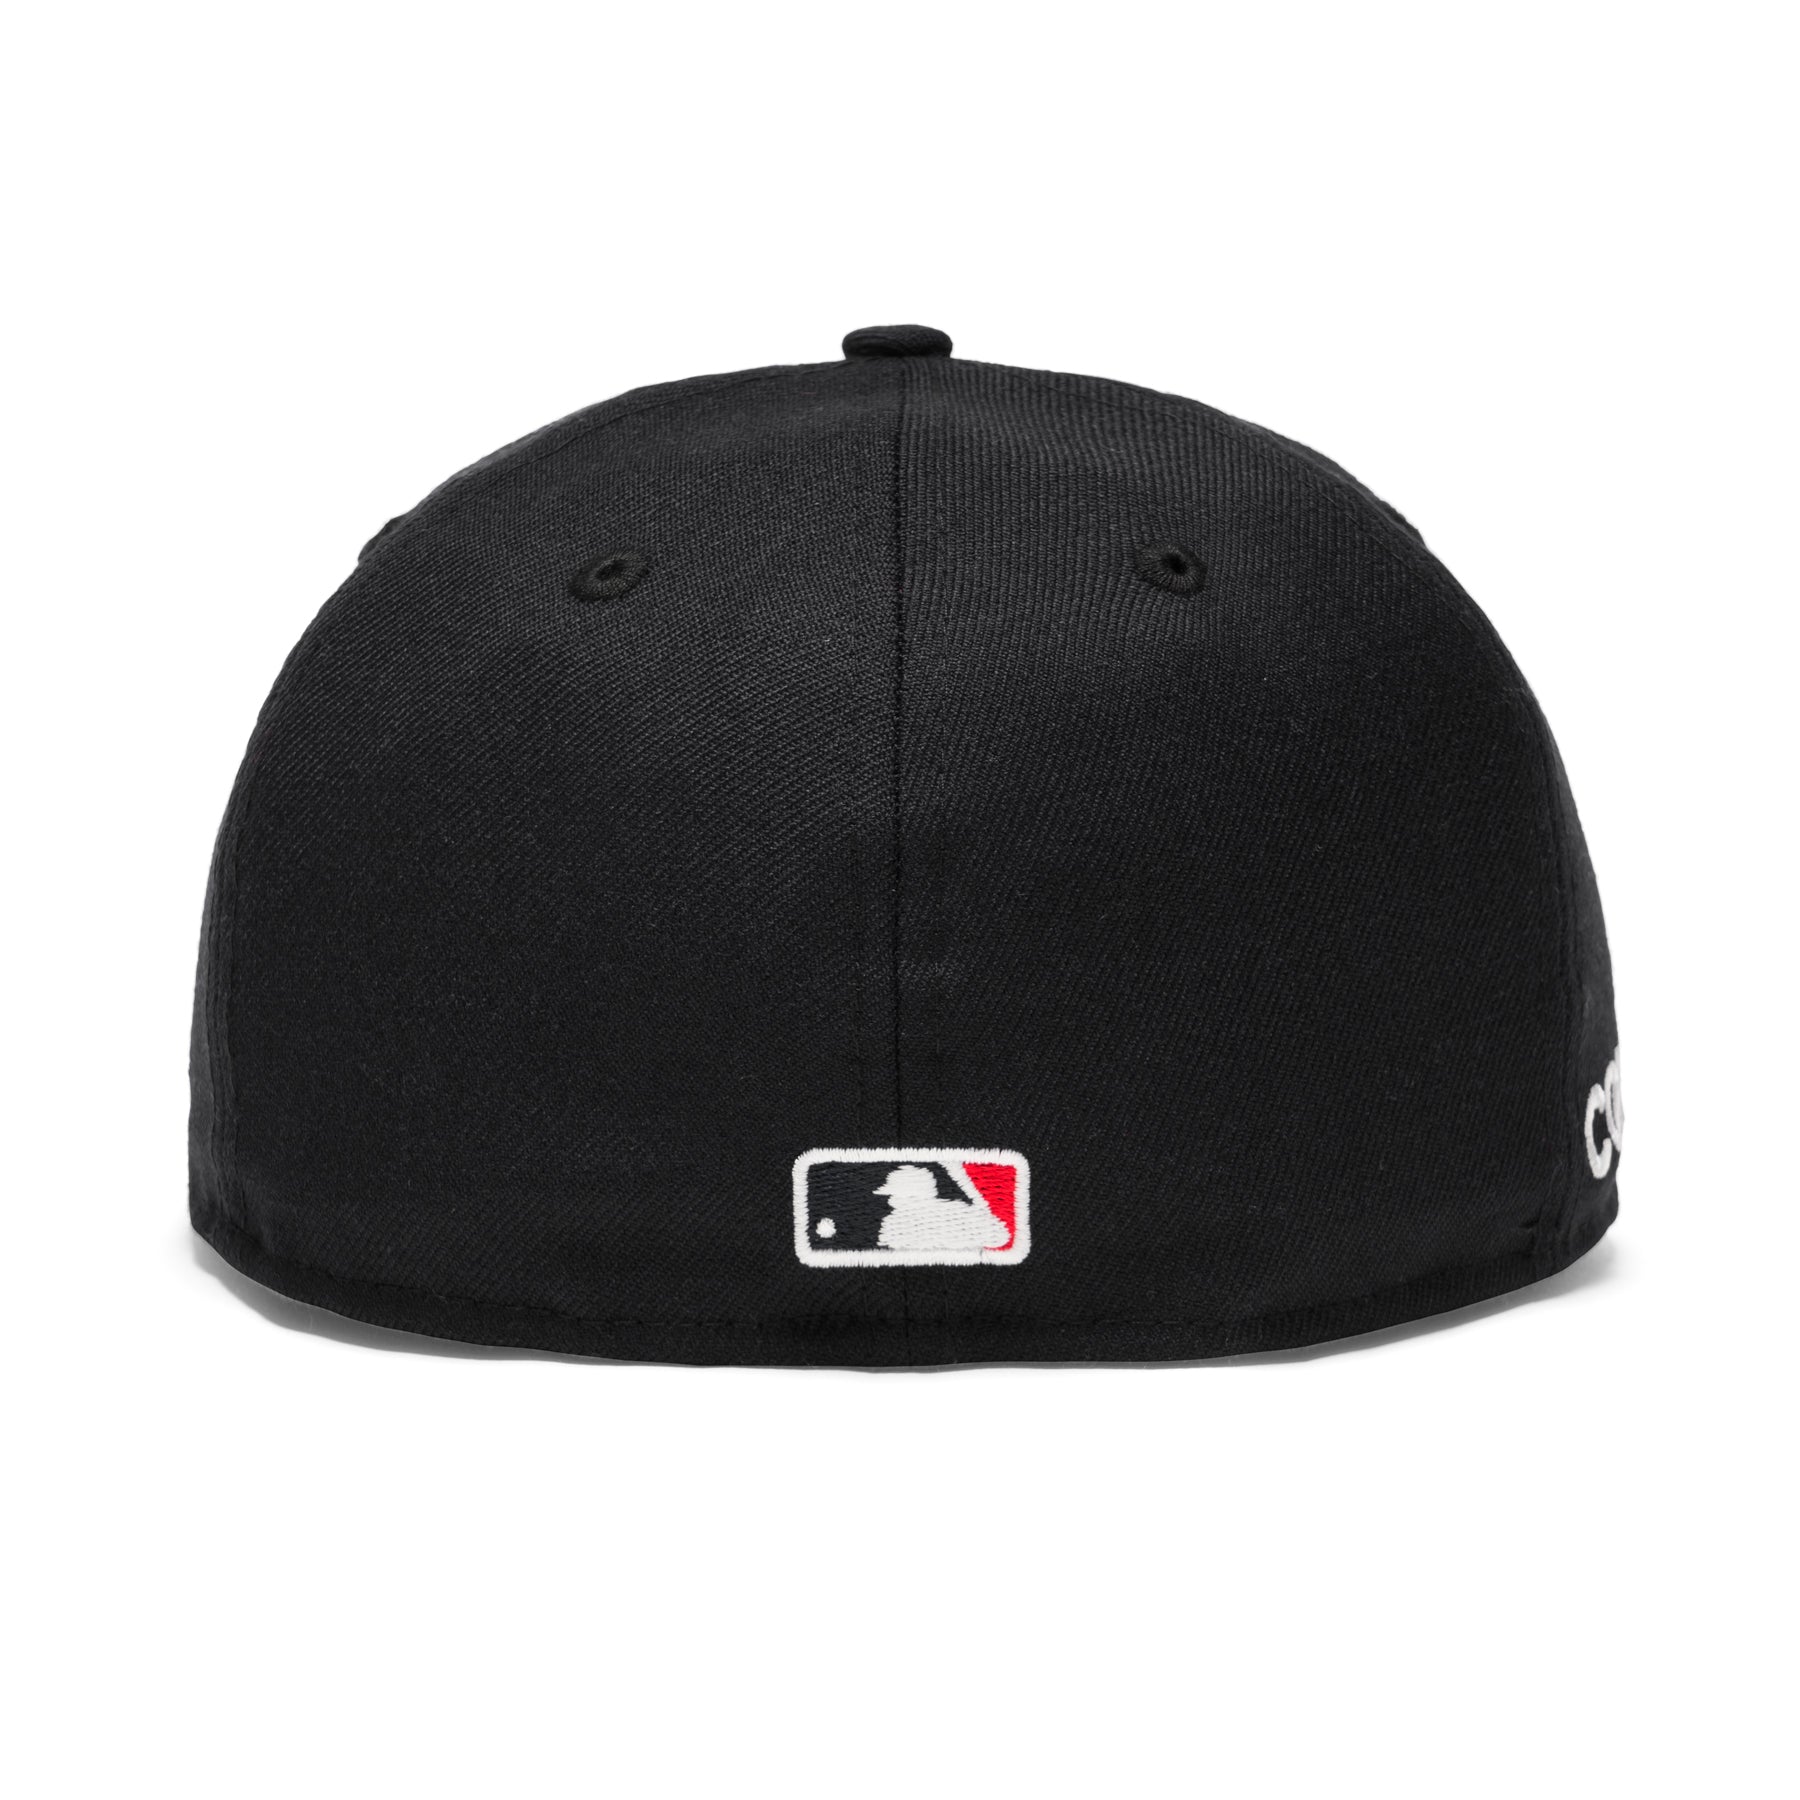 Concepts x New Era 5950 Boston Red Sox Fitted Hat (Sky Blue)